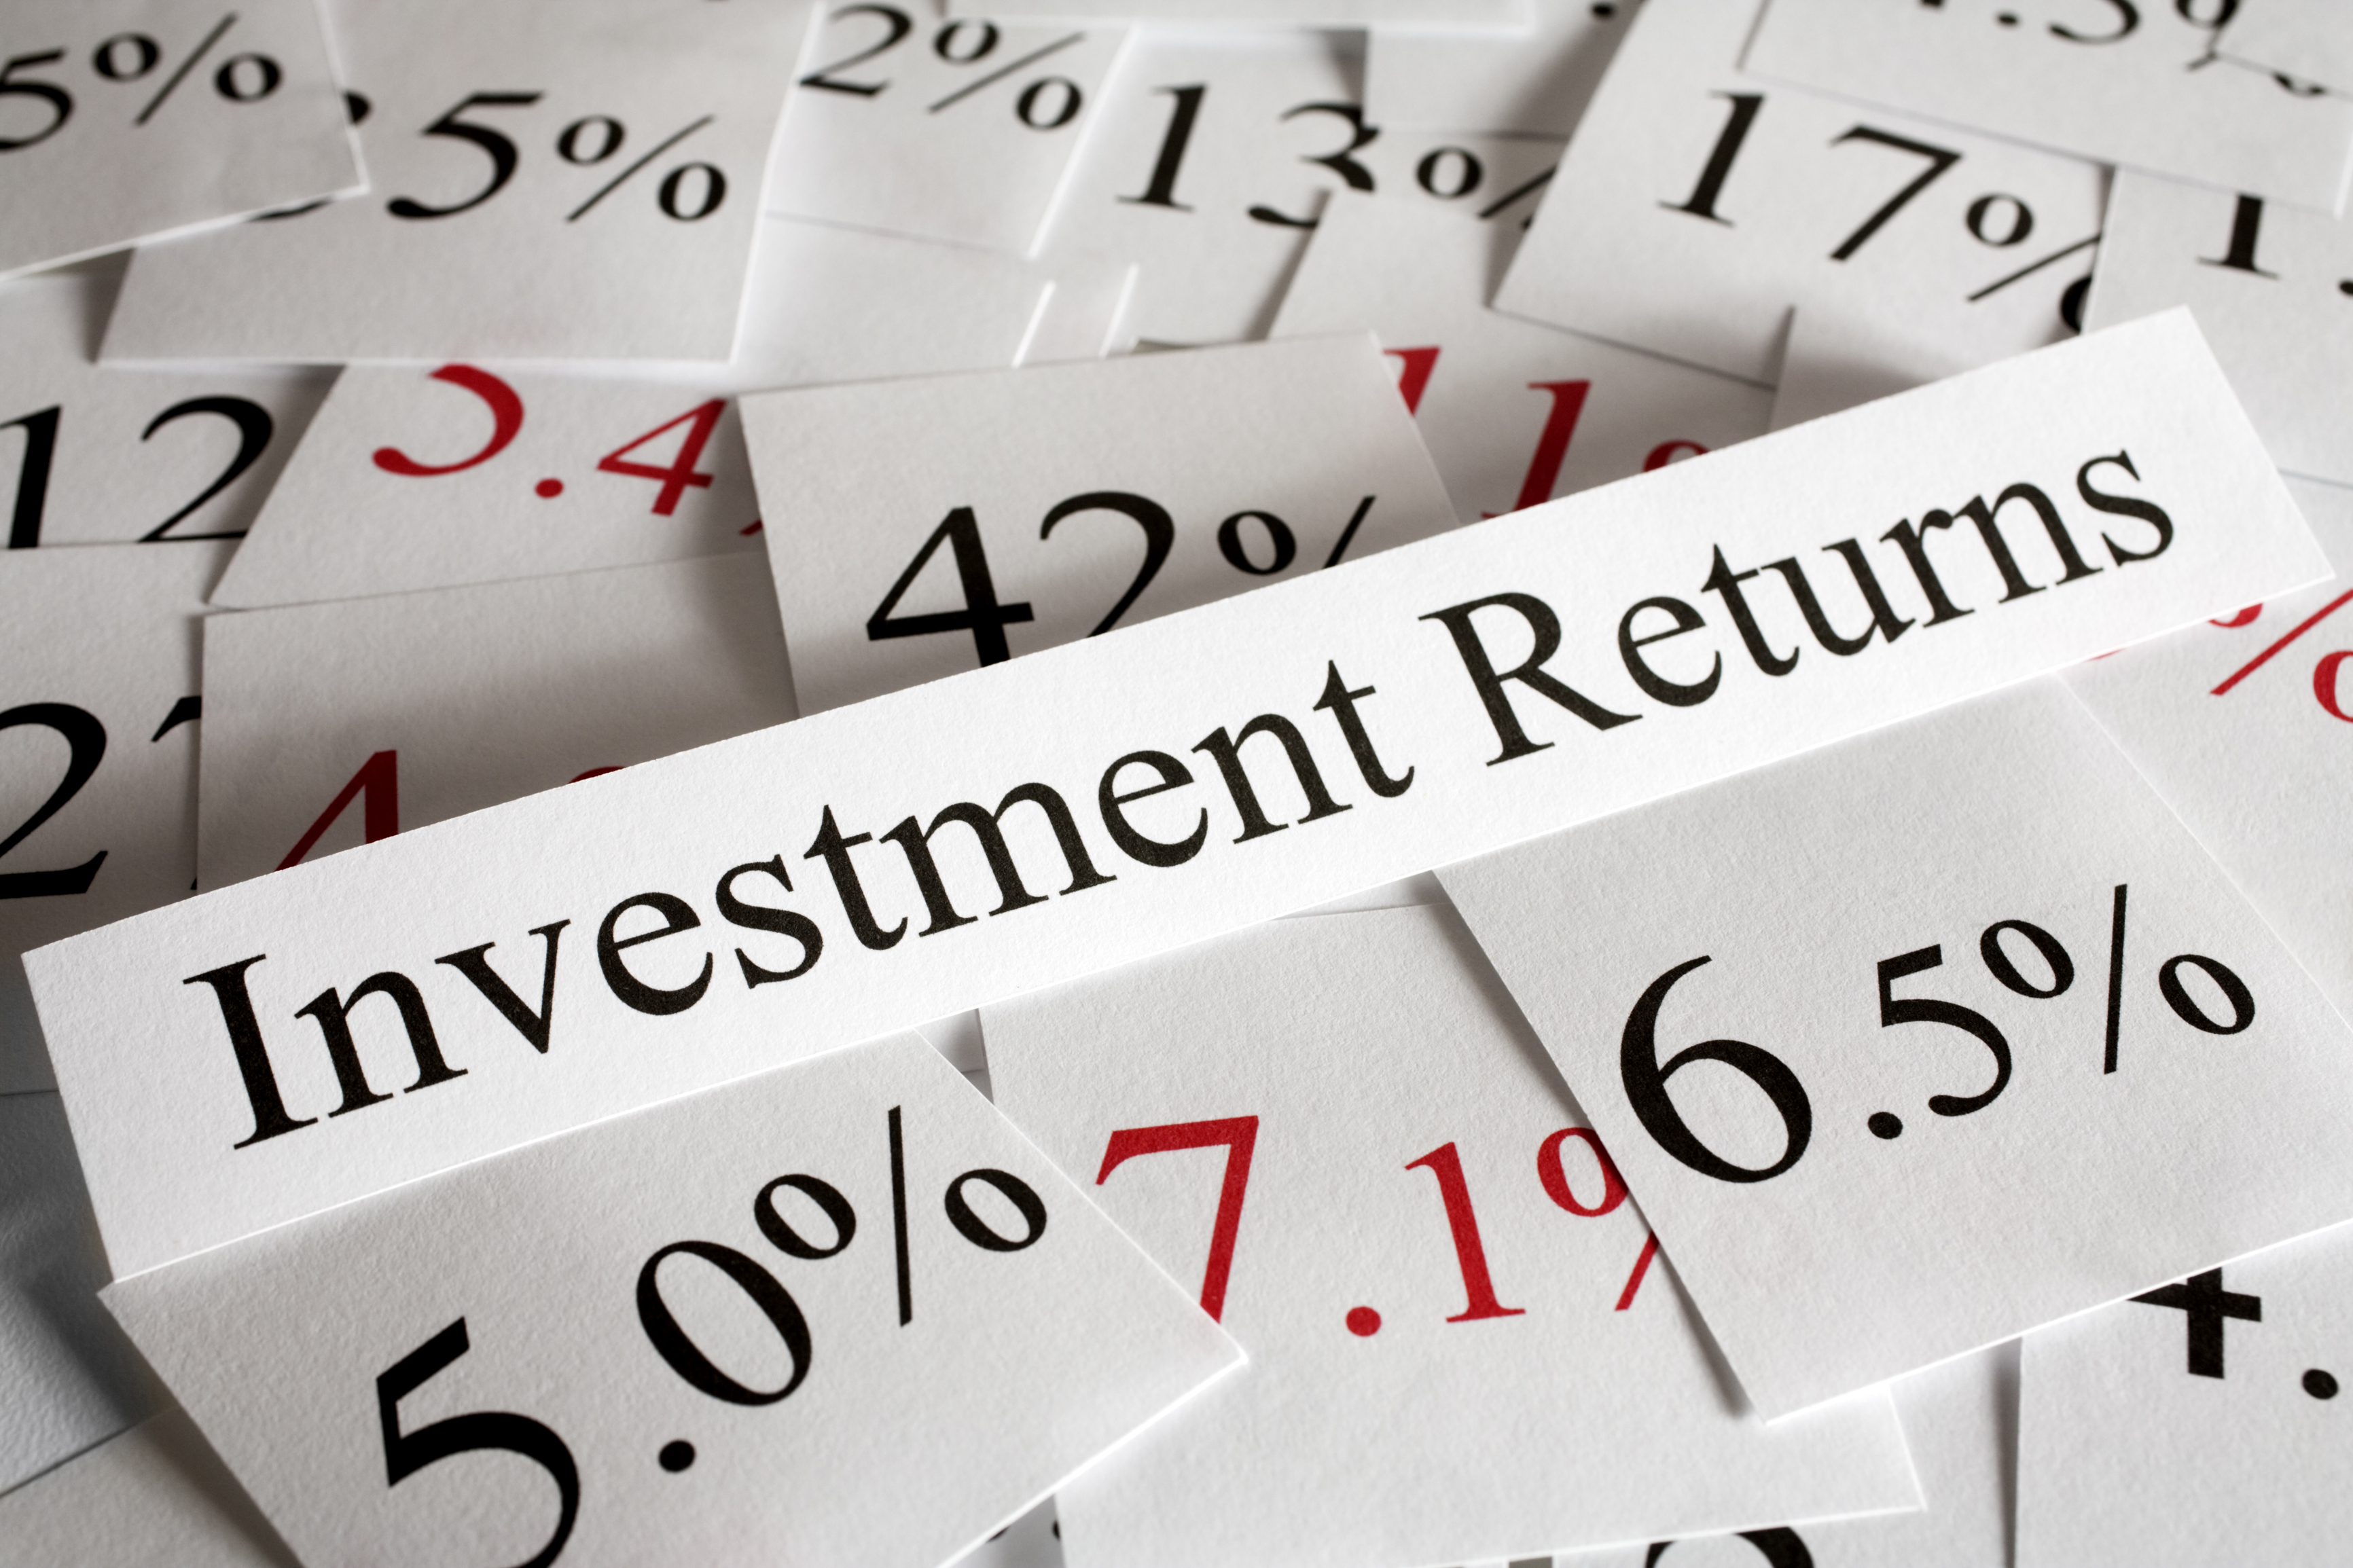 New Jersey and North Carolina Retirement Systems Modify Investment Return Assumptions in Opposite Directions